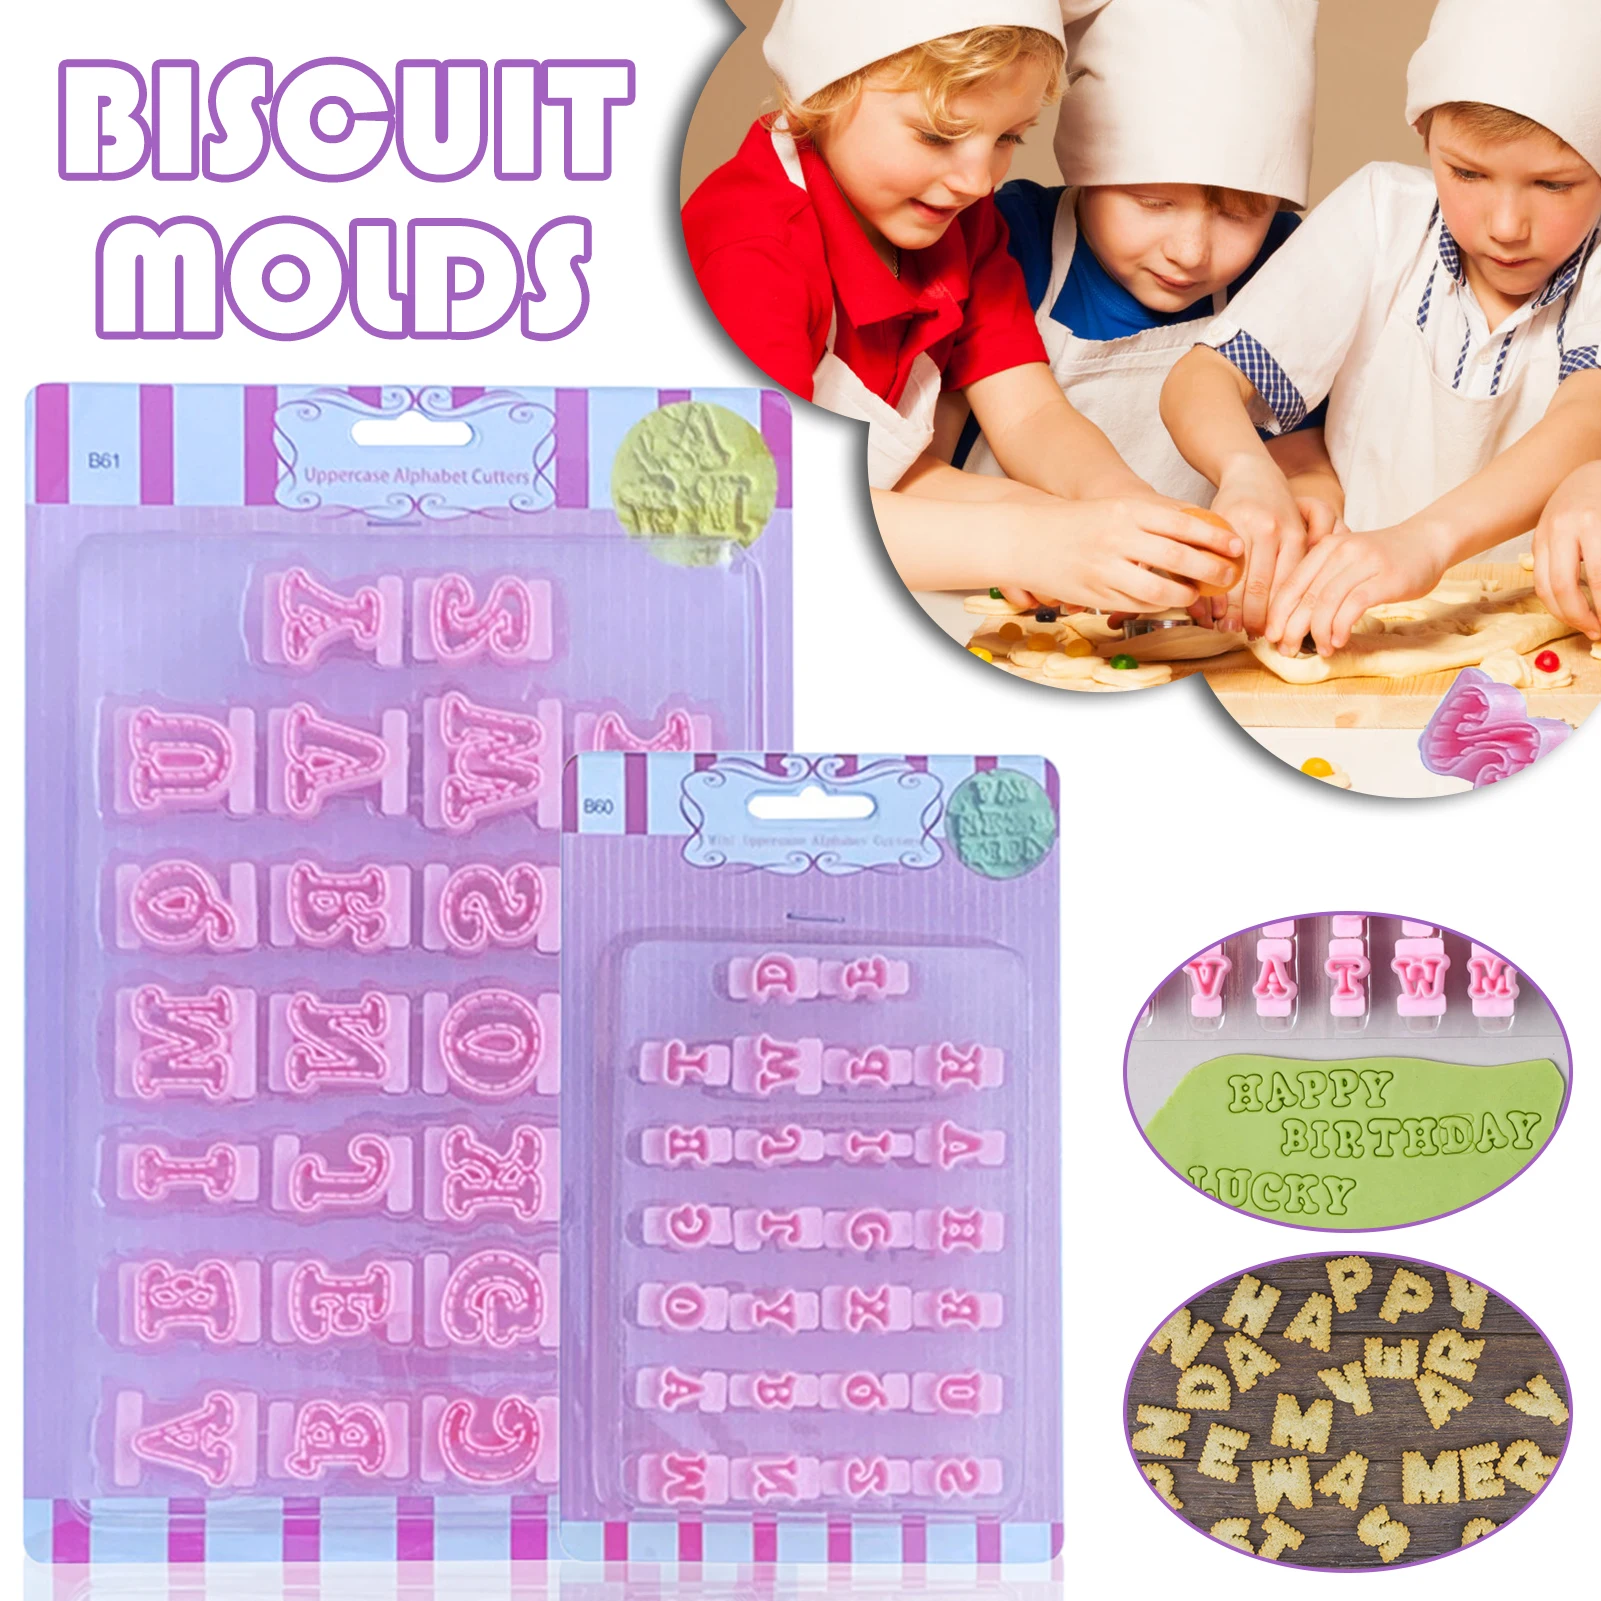 

26pcs/set Alphabet Cake Molds Cakes Fondant Chocolate Letter Cookies Cutter Words Press Stamp Baking Mold Embossing Mould